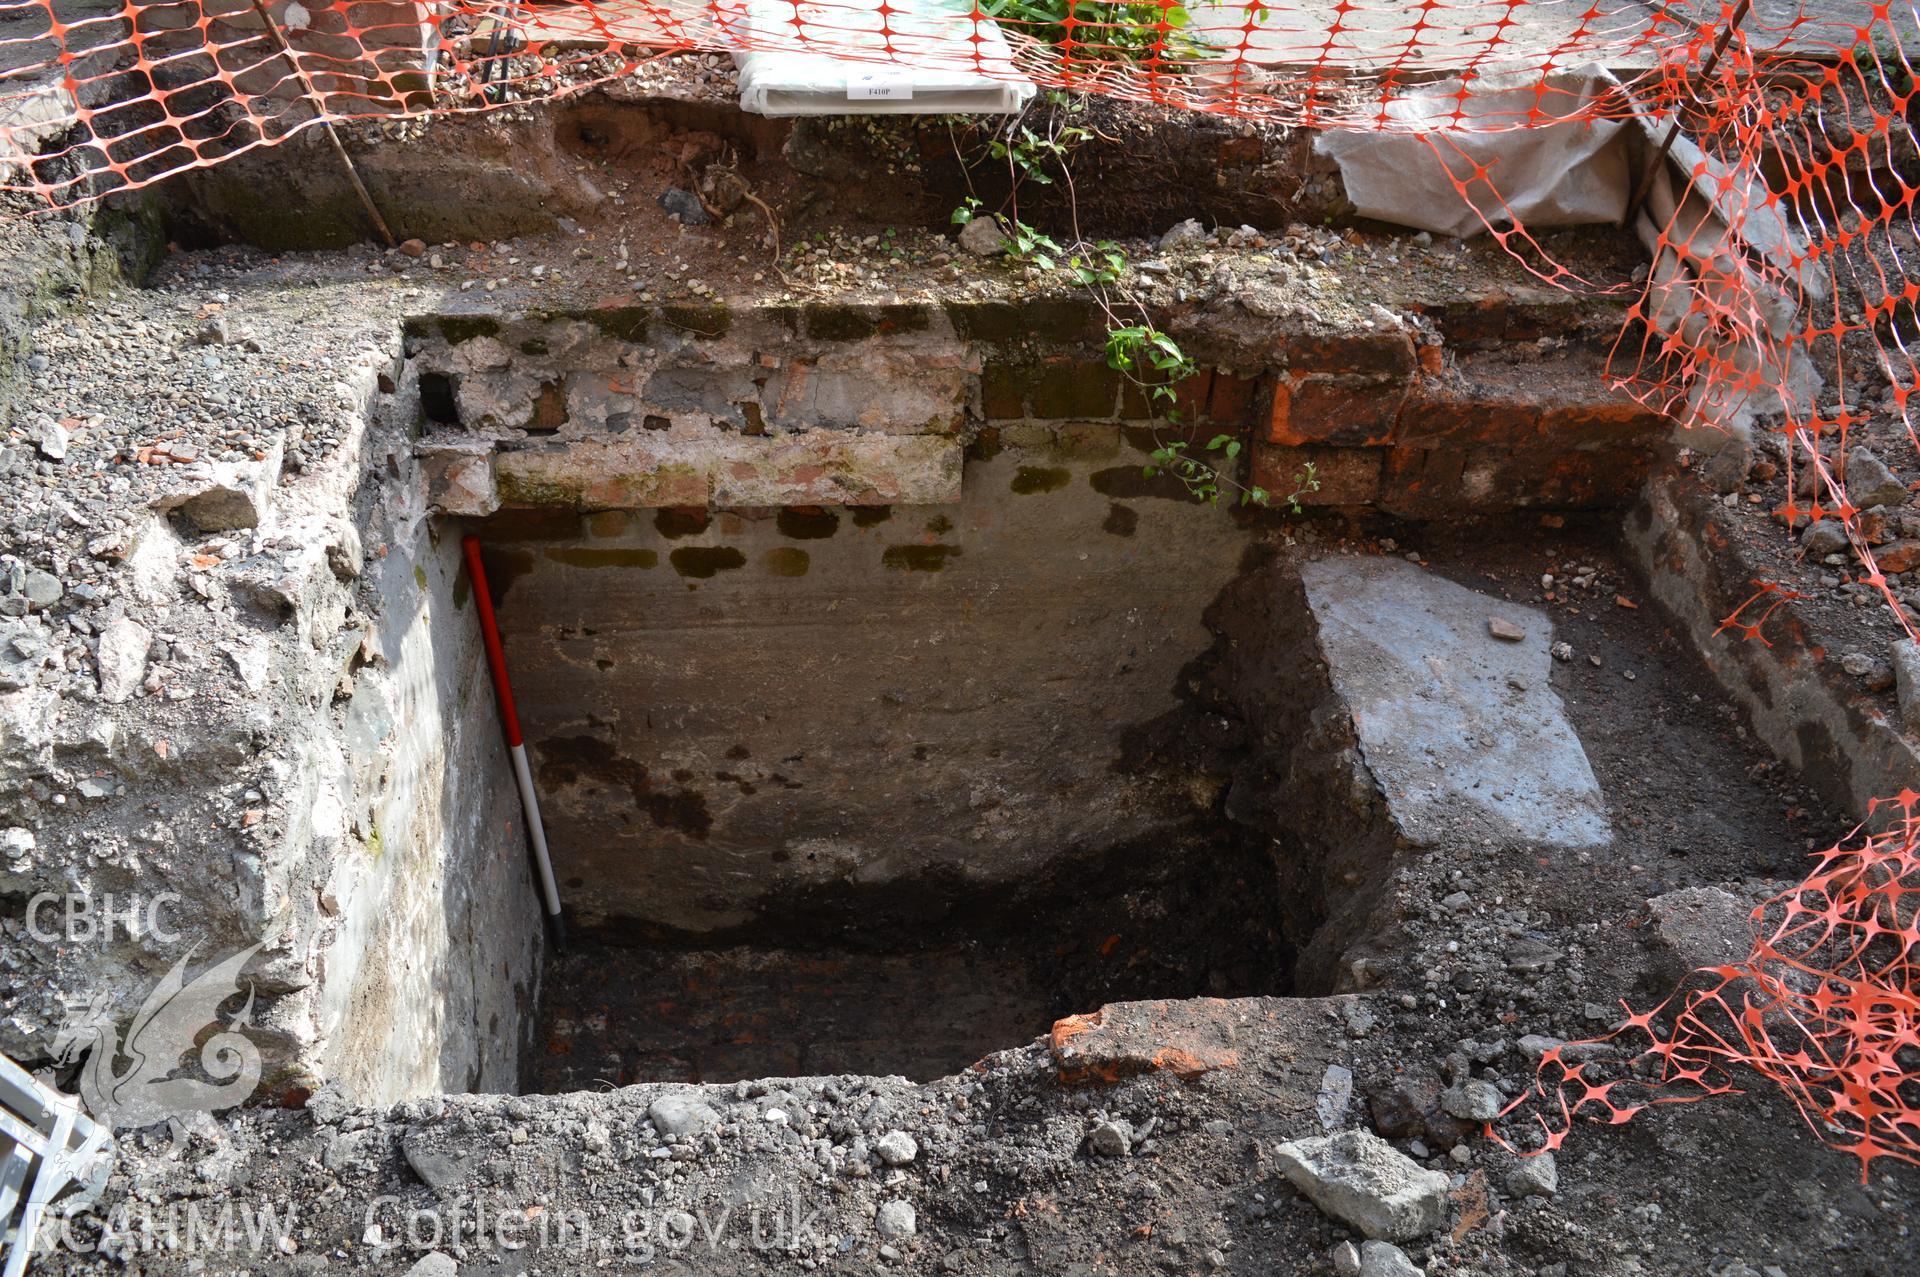 Digital colour photograph showing view from the south west showing partially excavated cellar void. Photographed as part of CPAT Project 2351: 2 Severn Street, Welshpool, Powys - Archaeological Watching Brief, 2019. Report no. 1663.